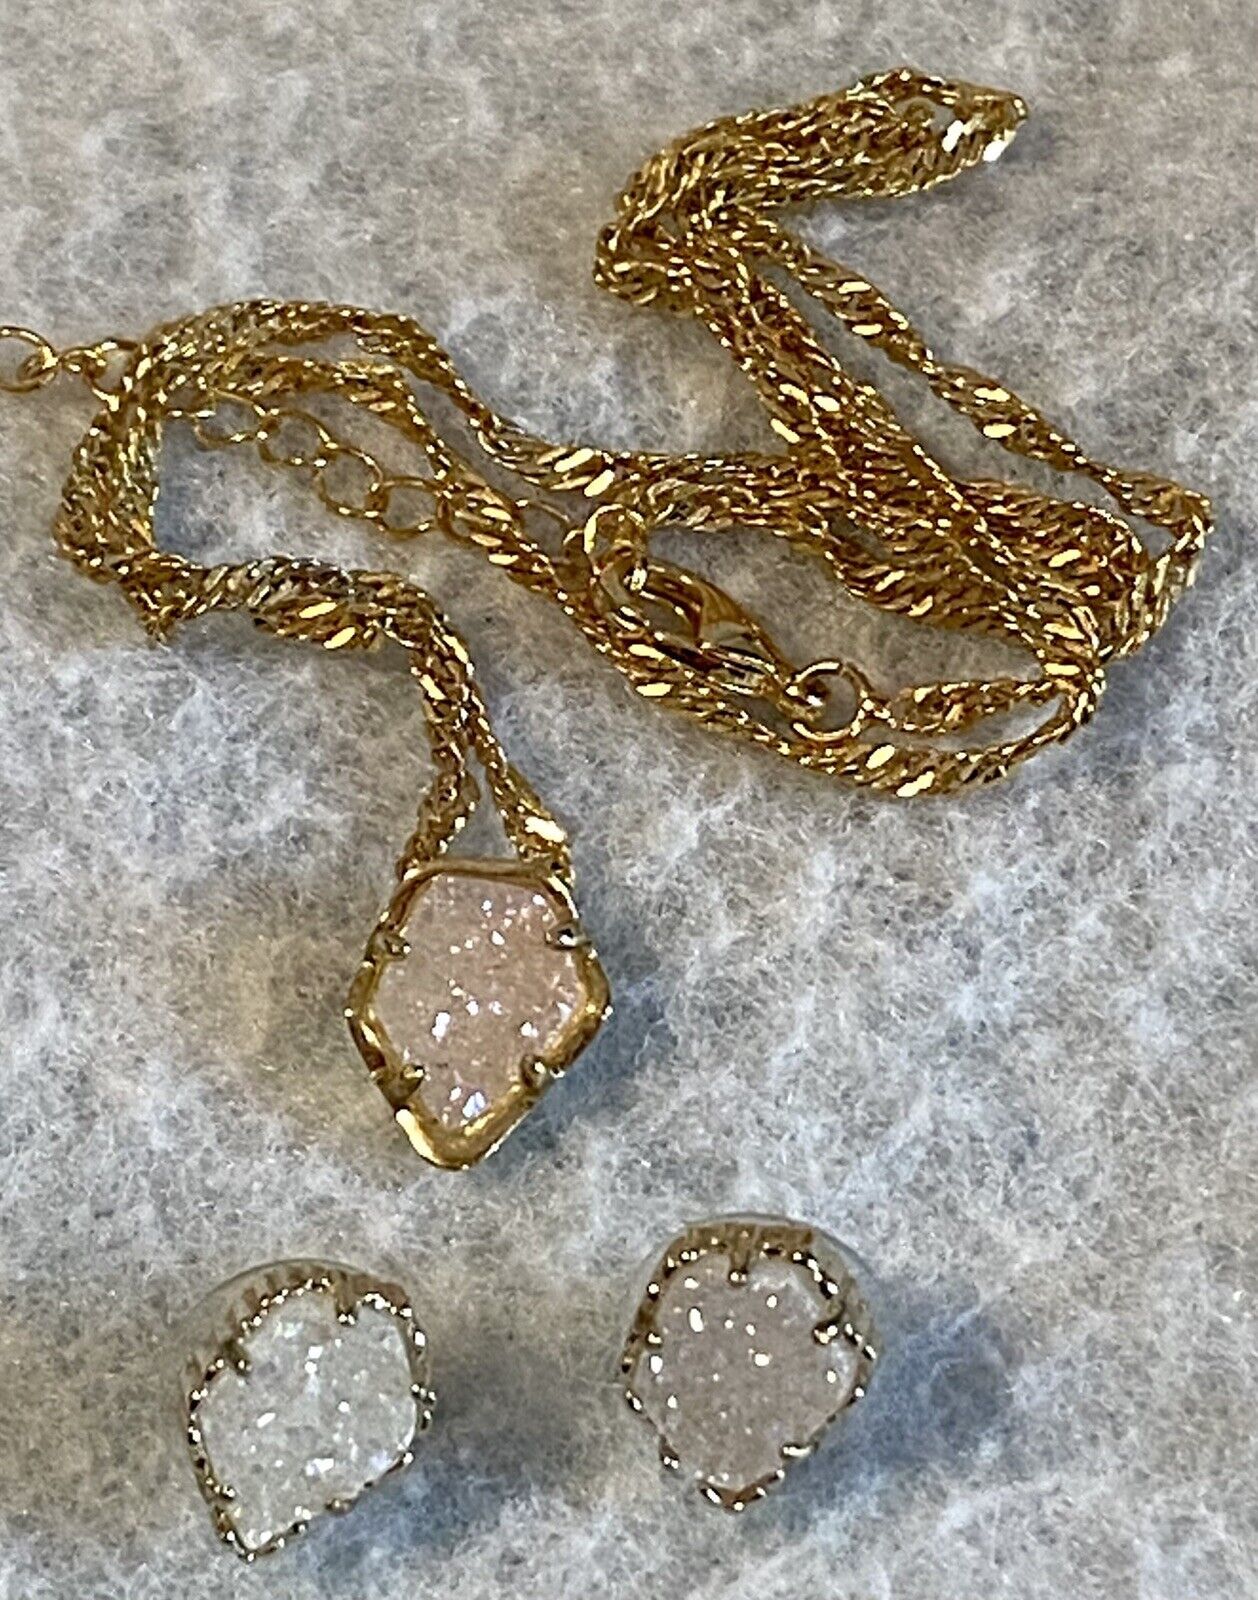 Kendra Scott Druzy Quartz Pendant With Necklace and Earrings Gold Tone Setting - $94.00